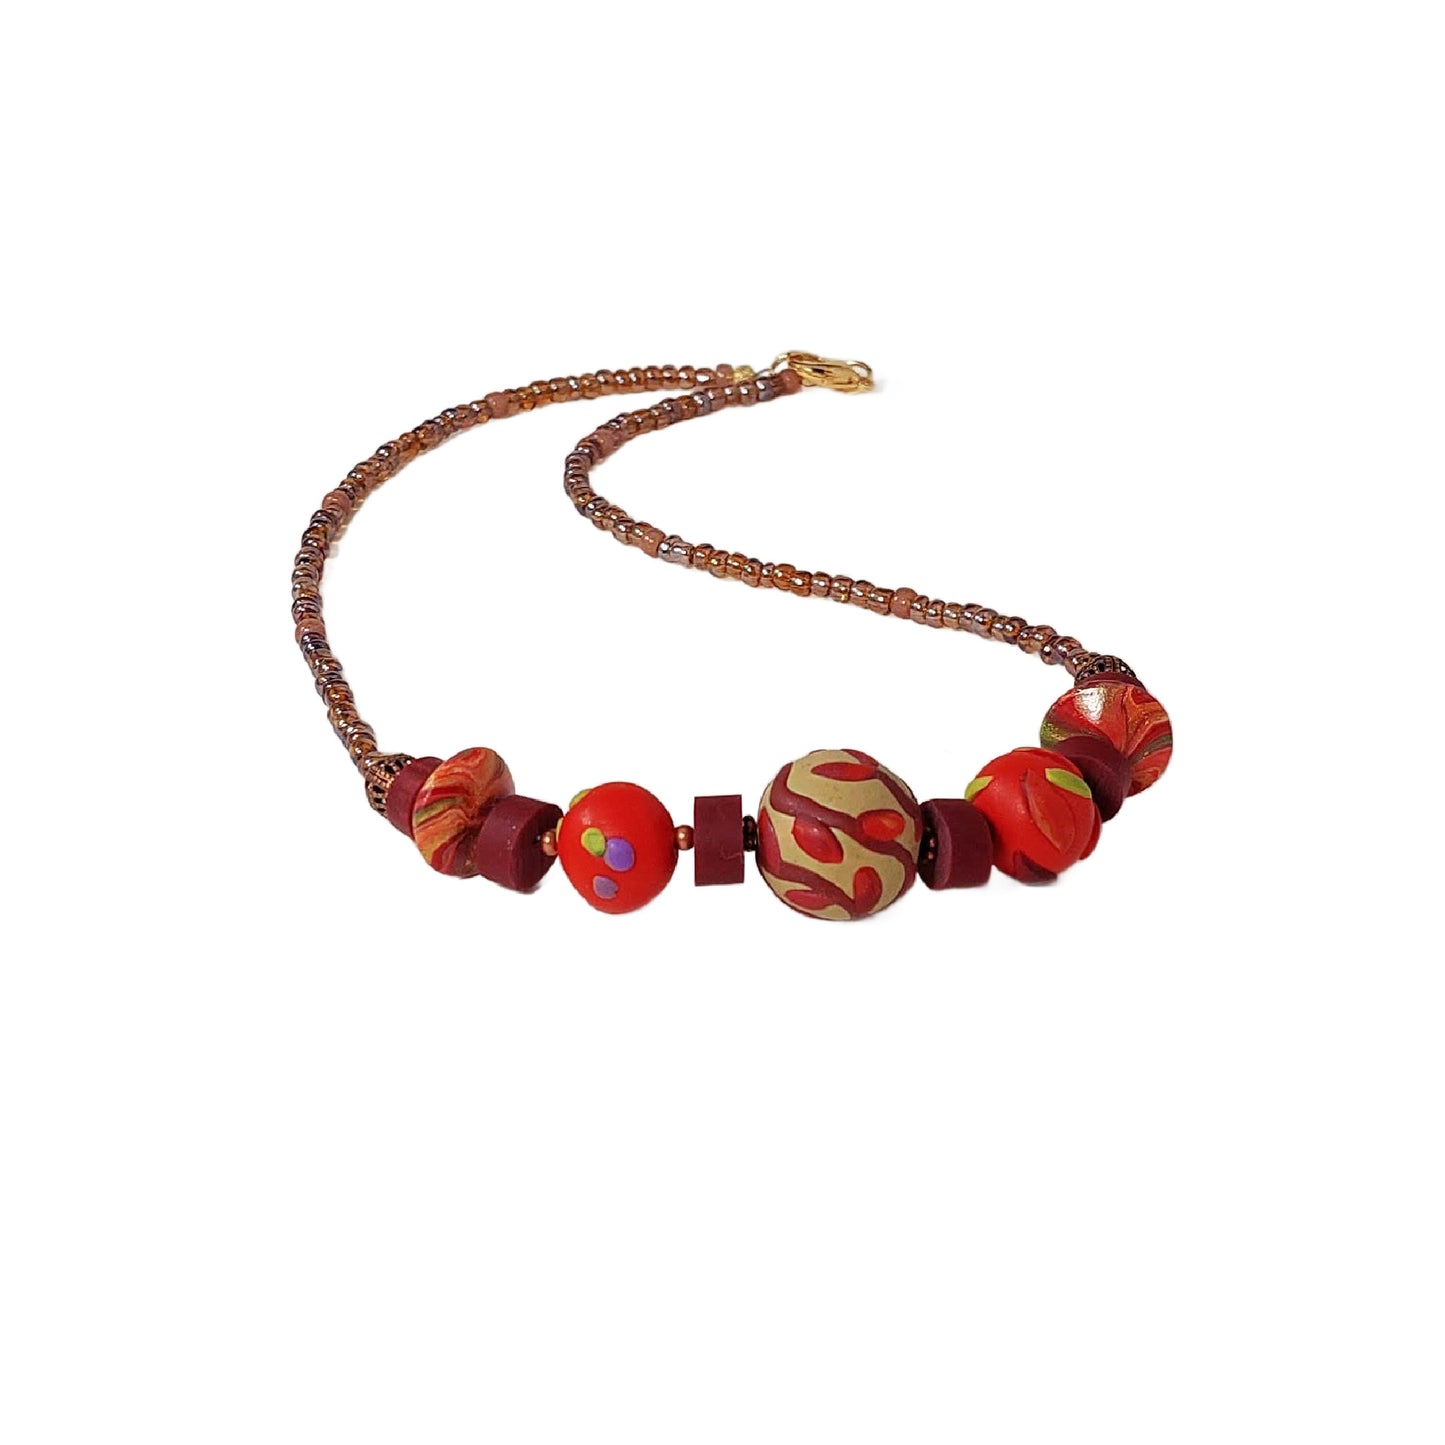 Rustic Leaves Bead Necklace, one-of-a-kind design,  brings a pop of color to your outfit. Free shipping in the US.